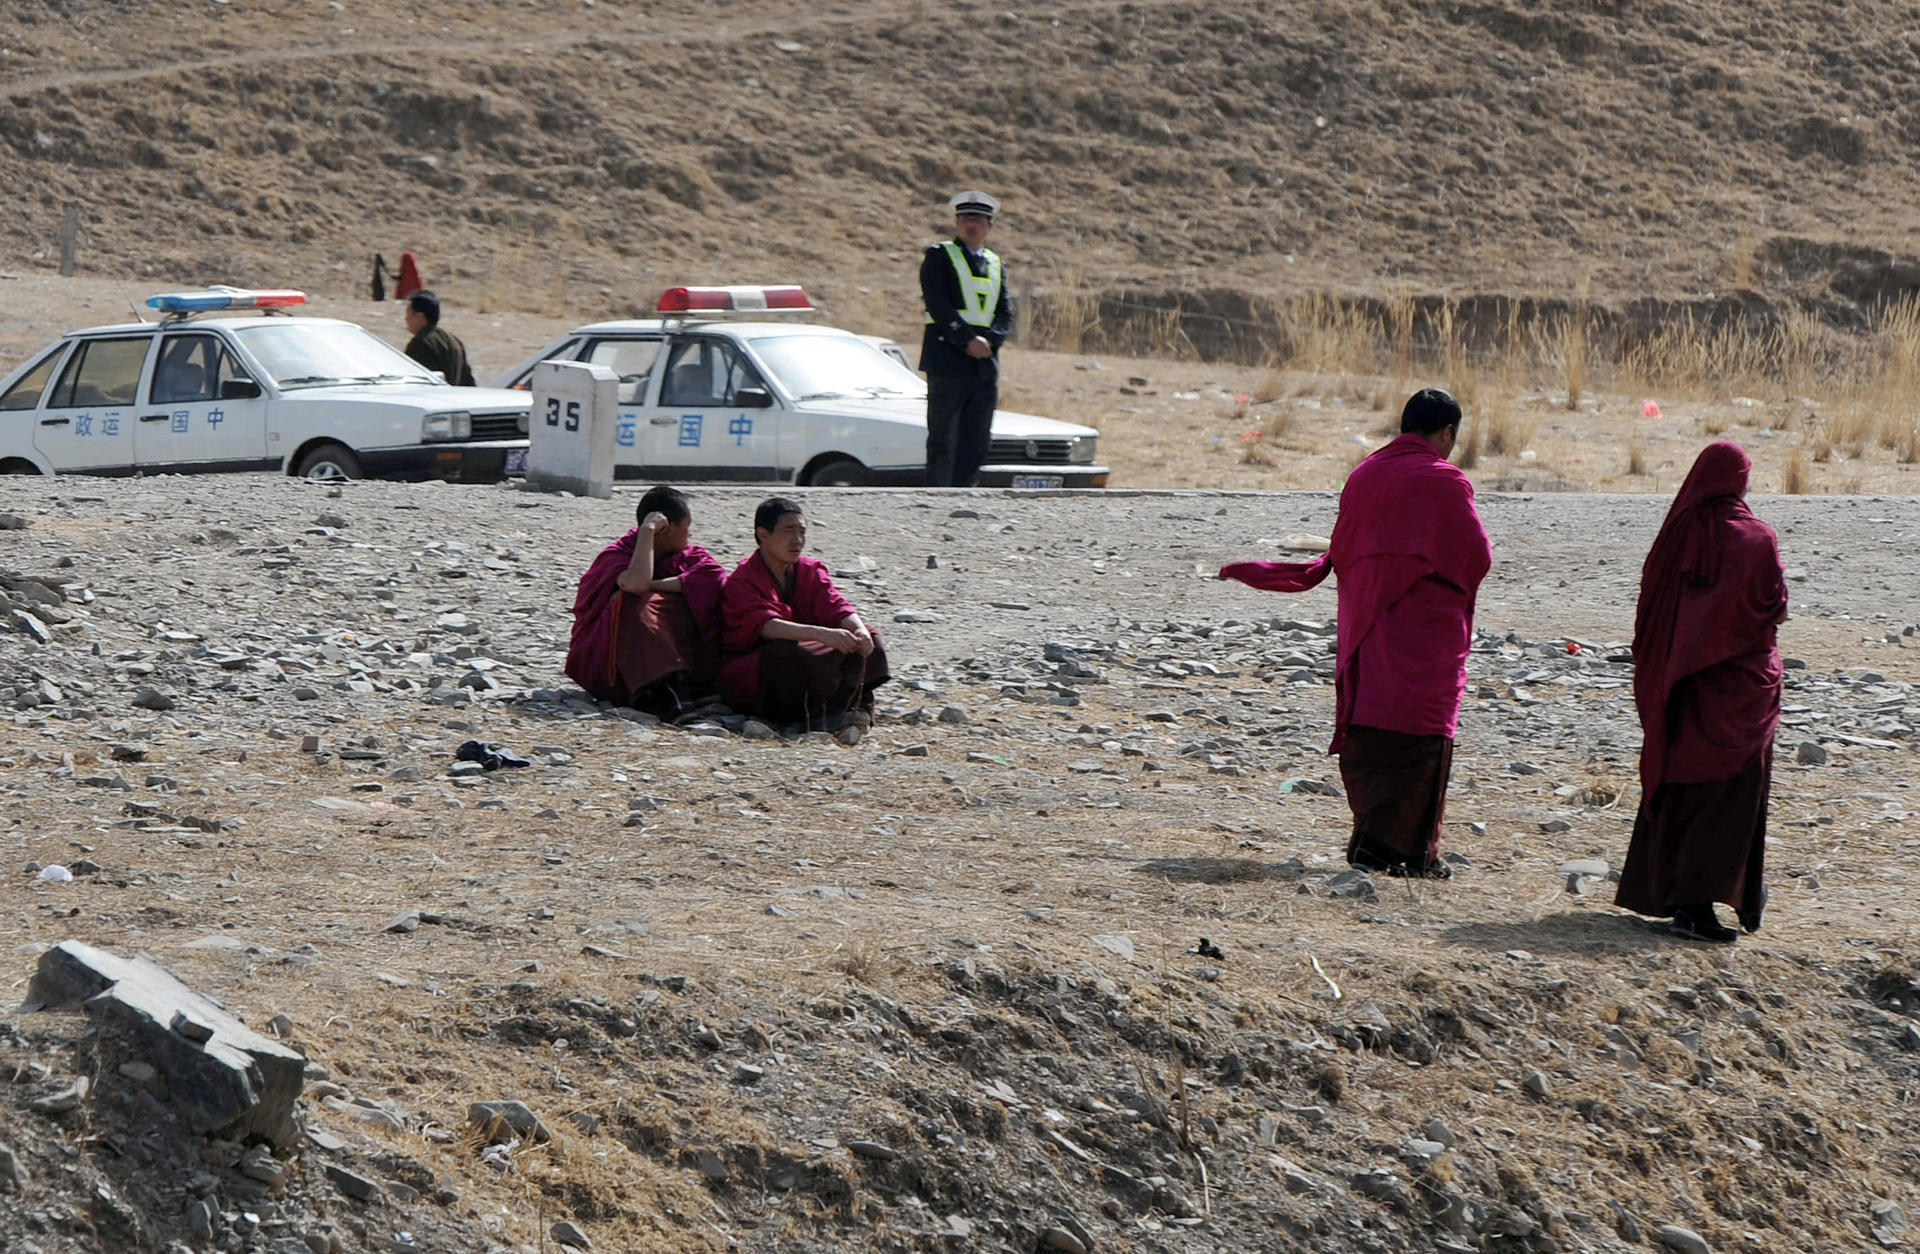 China maintains its grip on restive provinces populated by minorities - such as Tibet - with its military might and Han immigrants. Photo: AFP